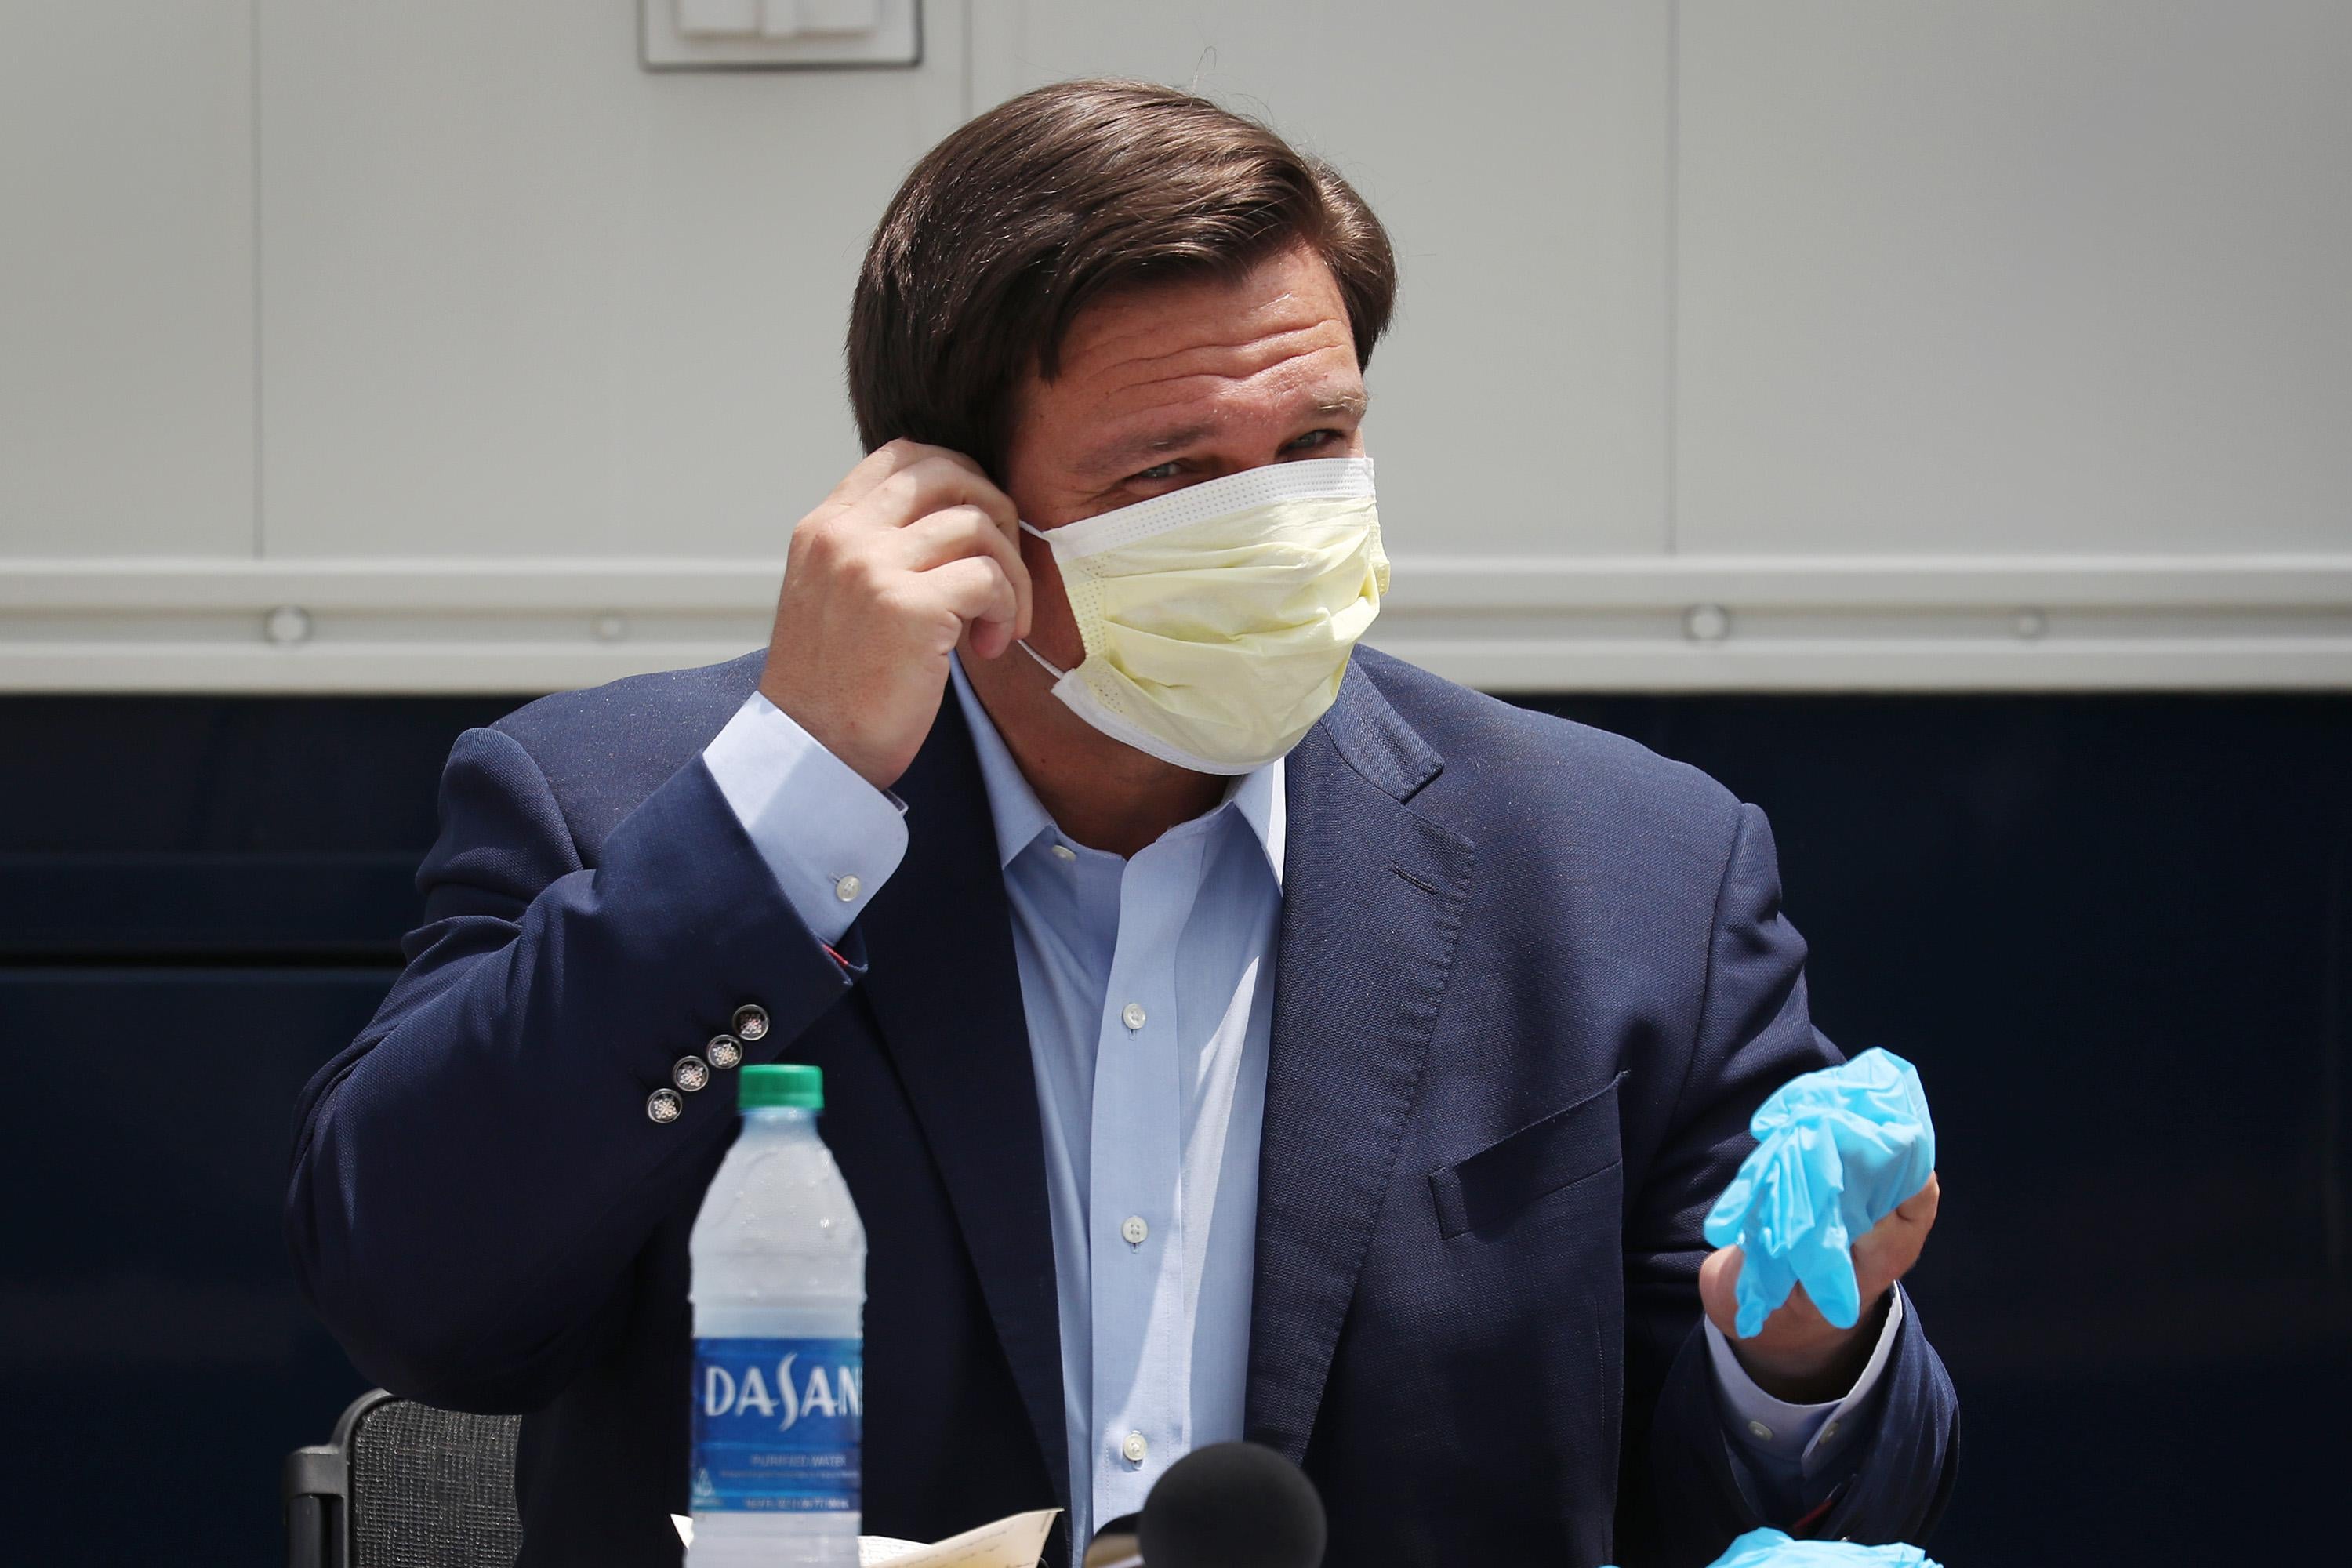 DeSantis wears a mask while speaking at a press conference.